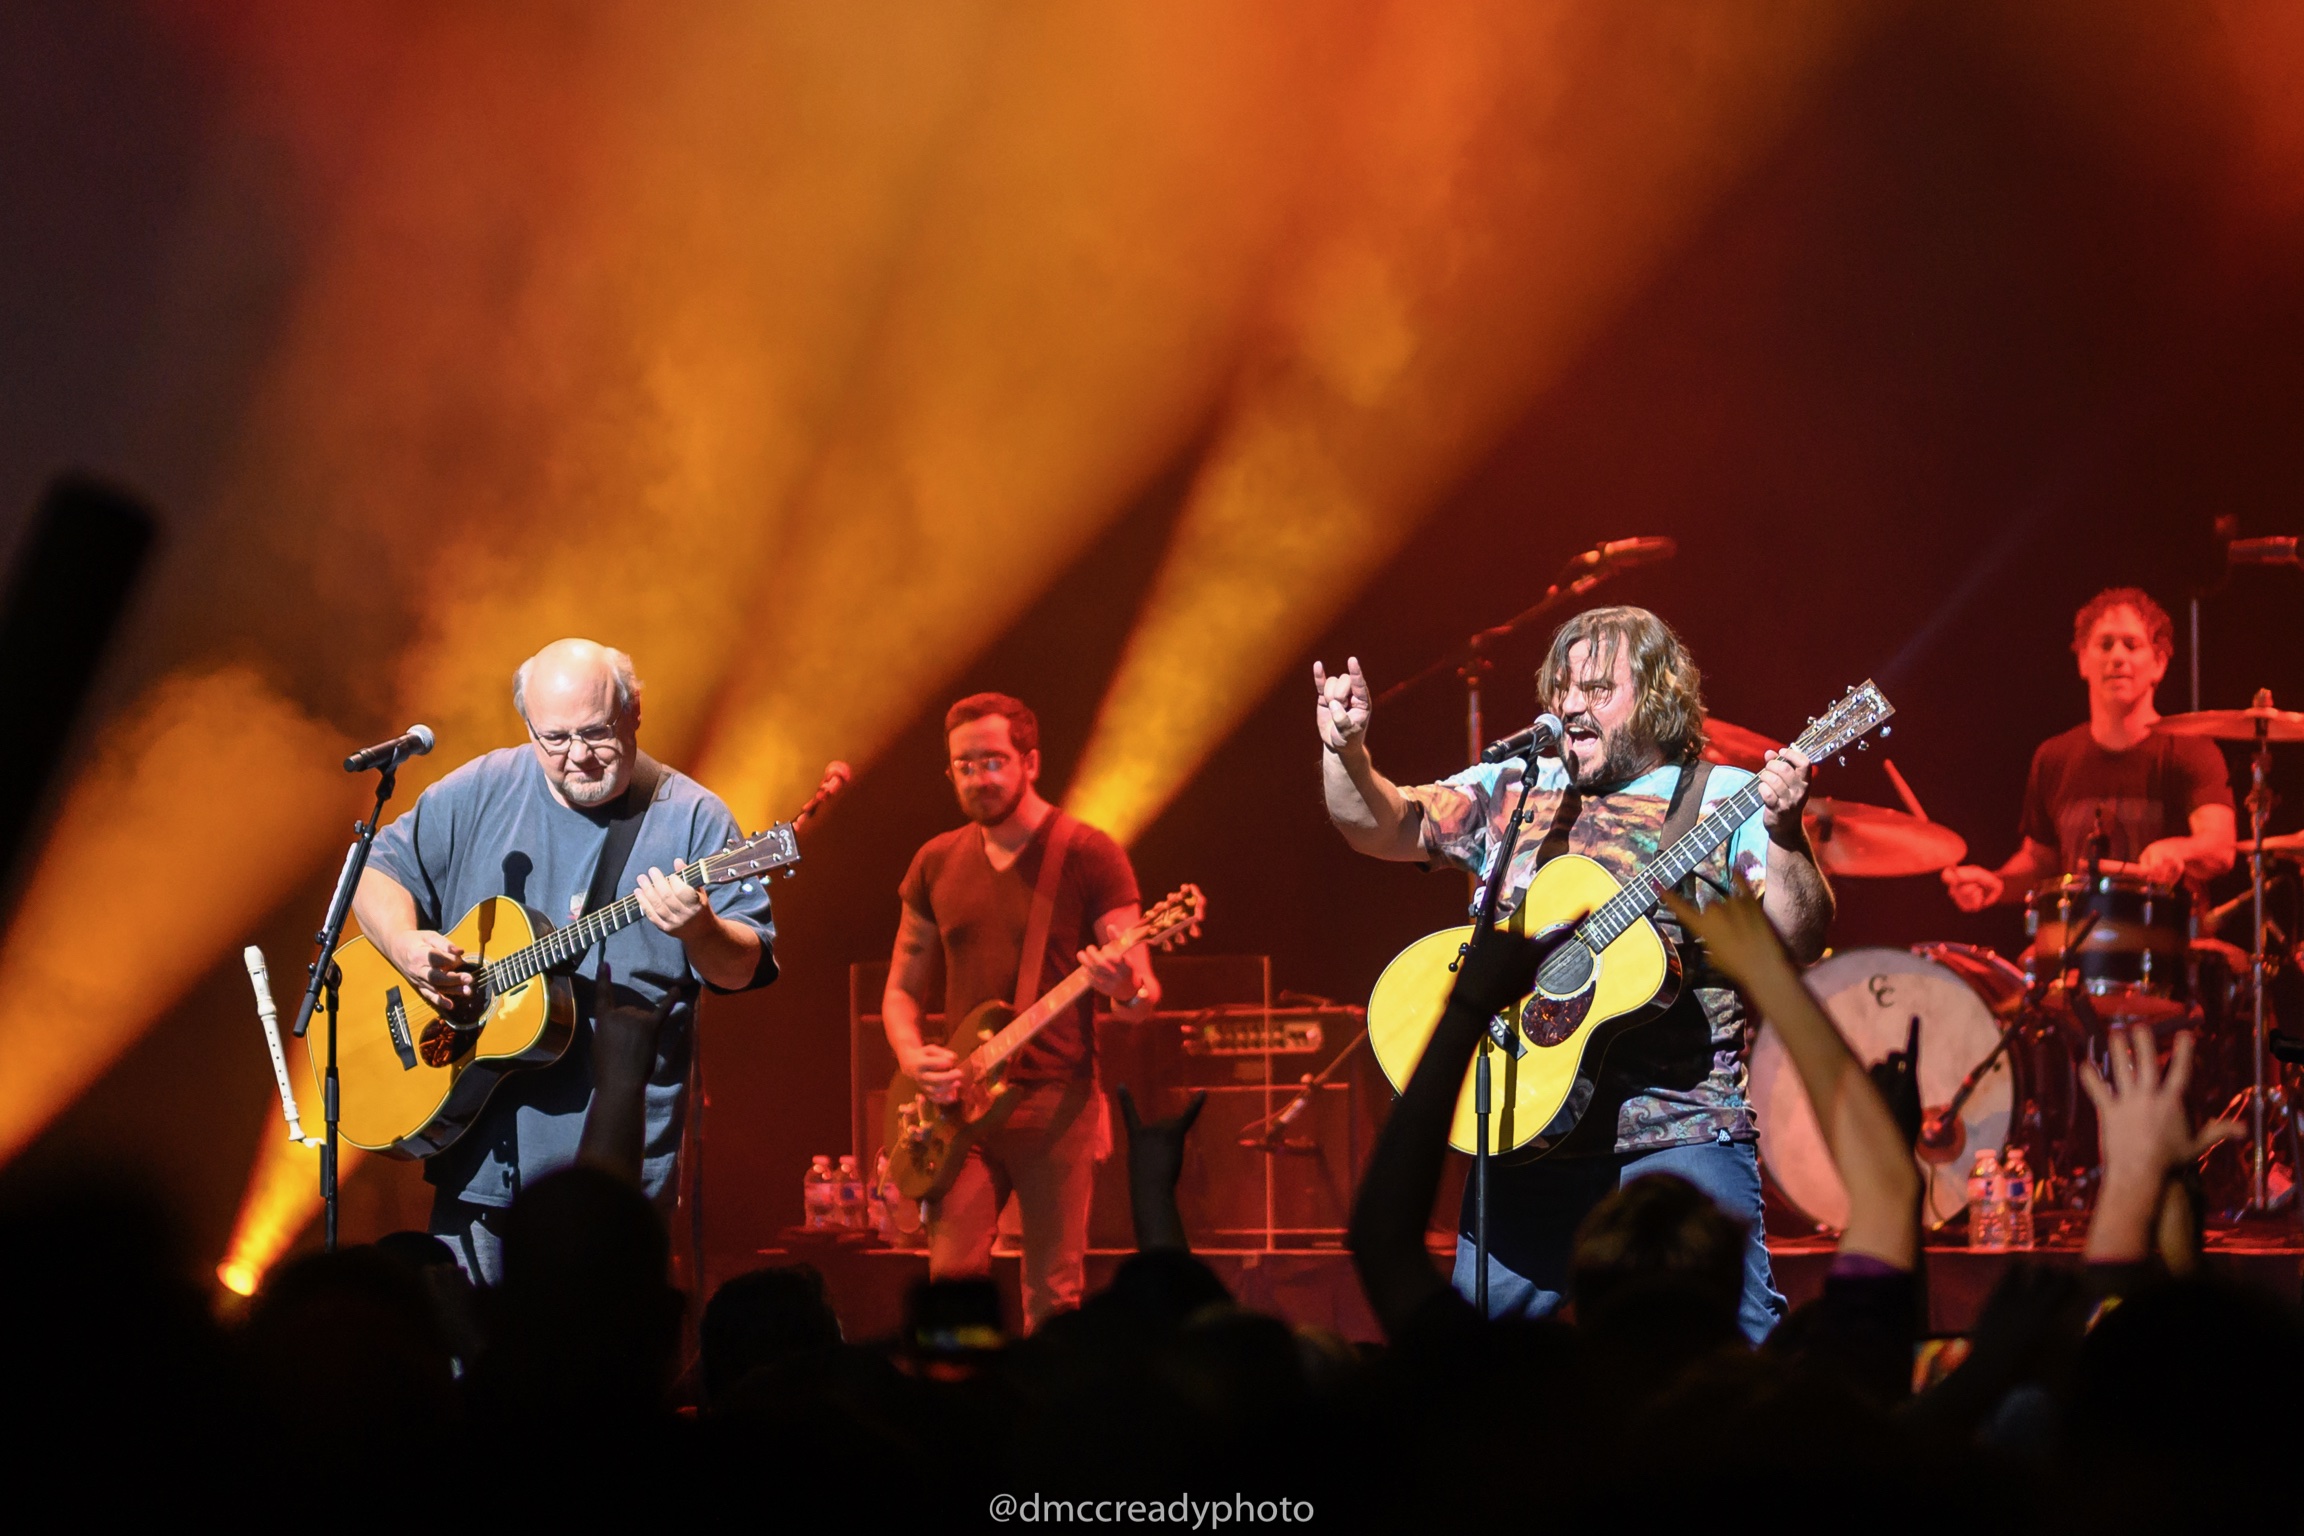 Tenacious D Brought Post Apocalyptic Metal & Comedy to ACL Live: Review